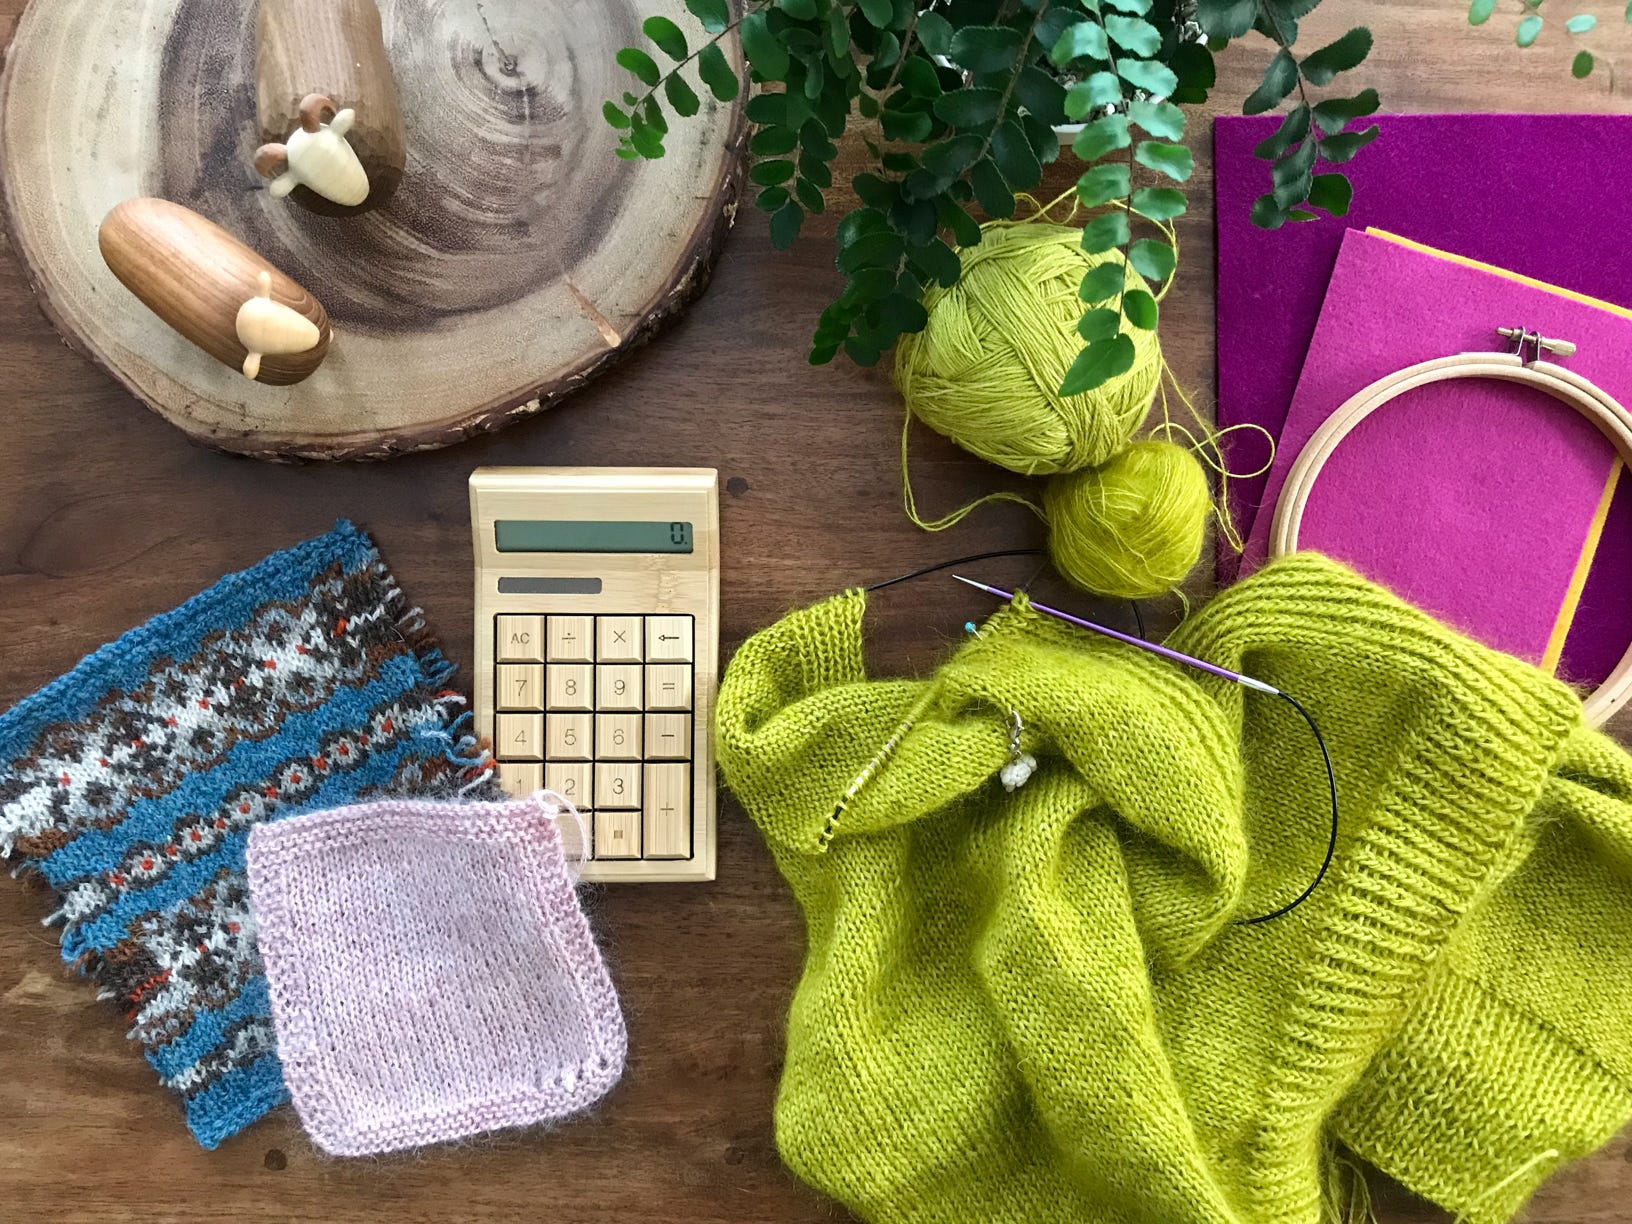 Knitting as a creative practice - by Anne Vally